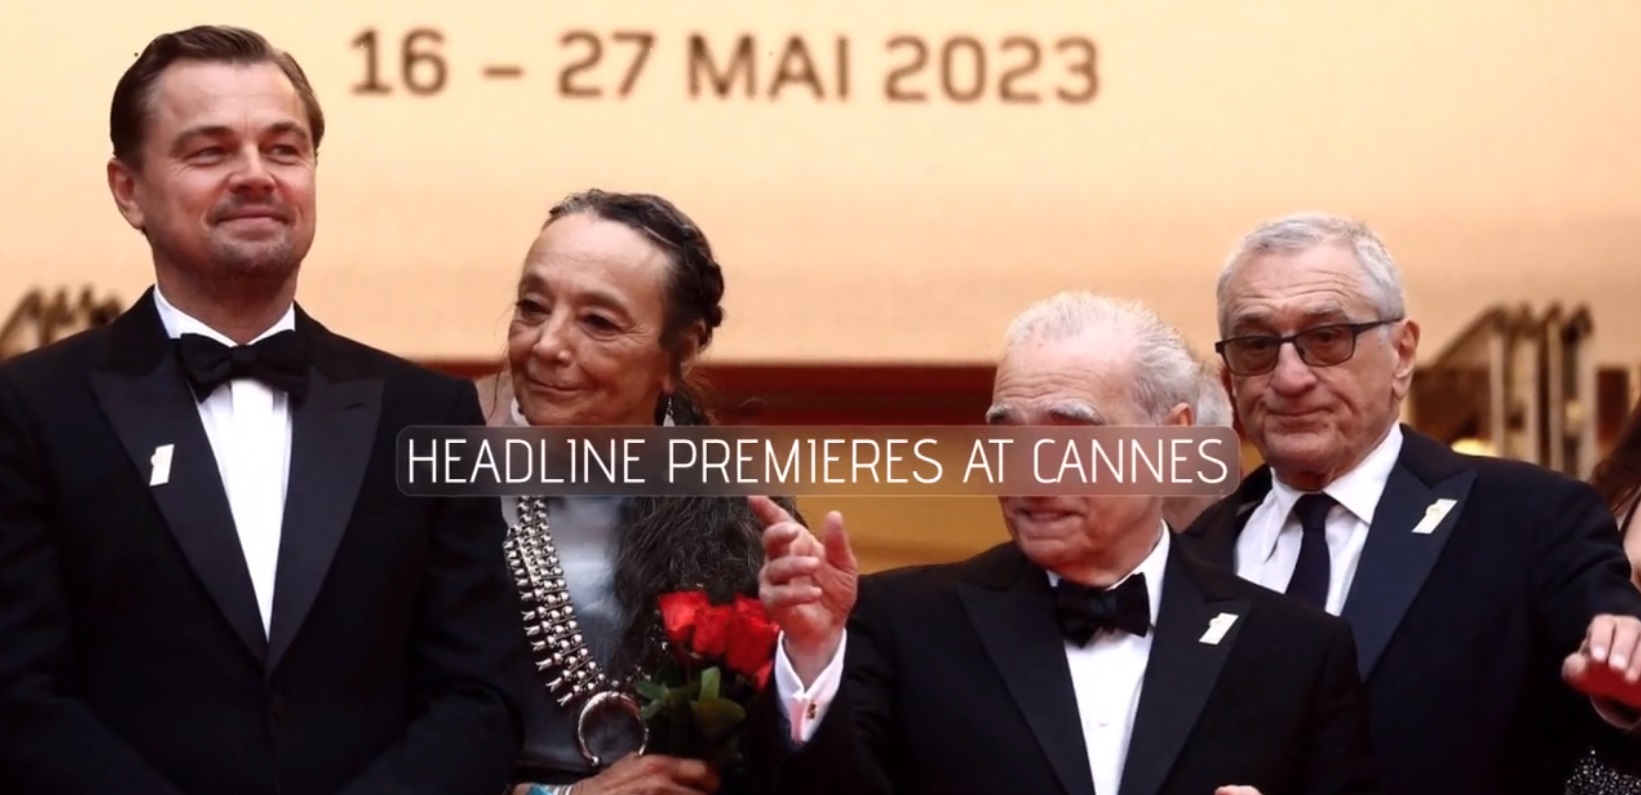 corporate hospitality at cannes film festival